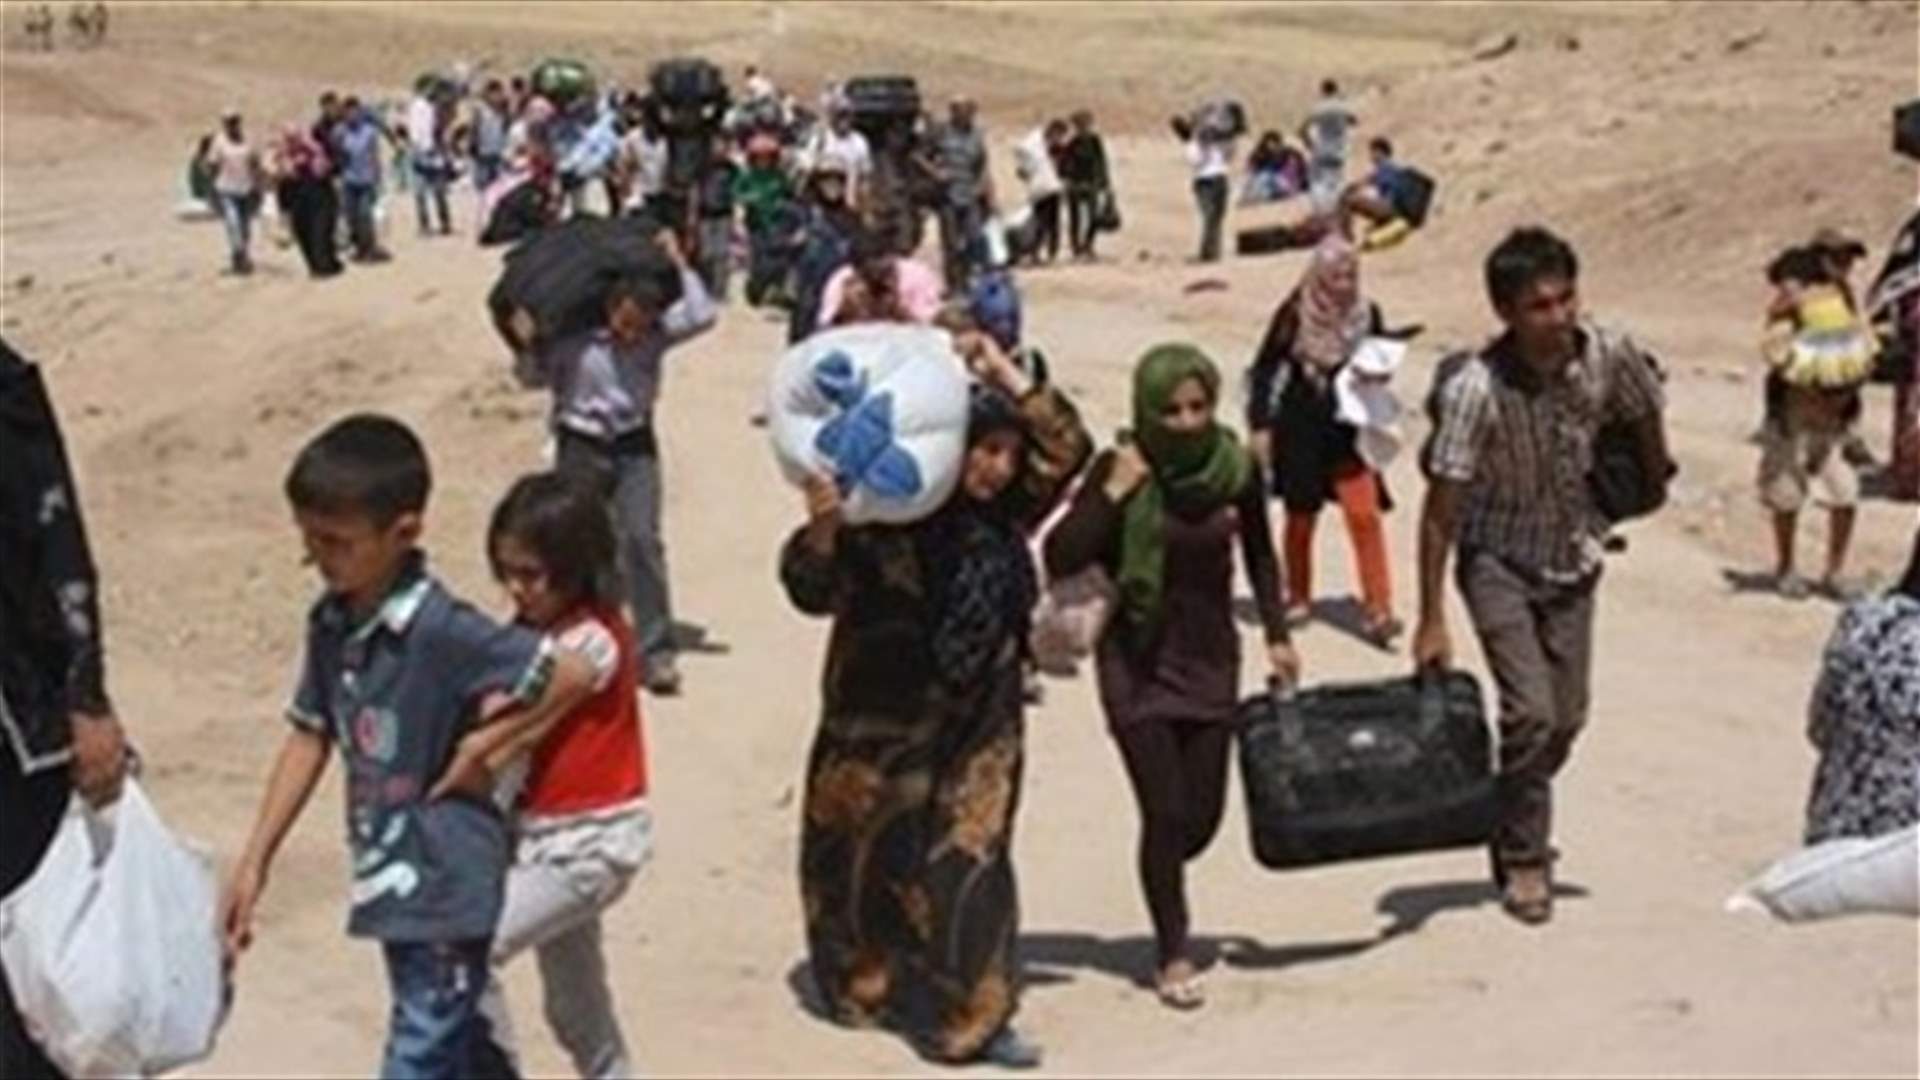 Bombs hit convoy of displaced people in Iraq, kills 18 - police